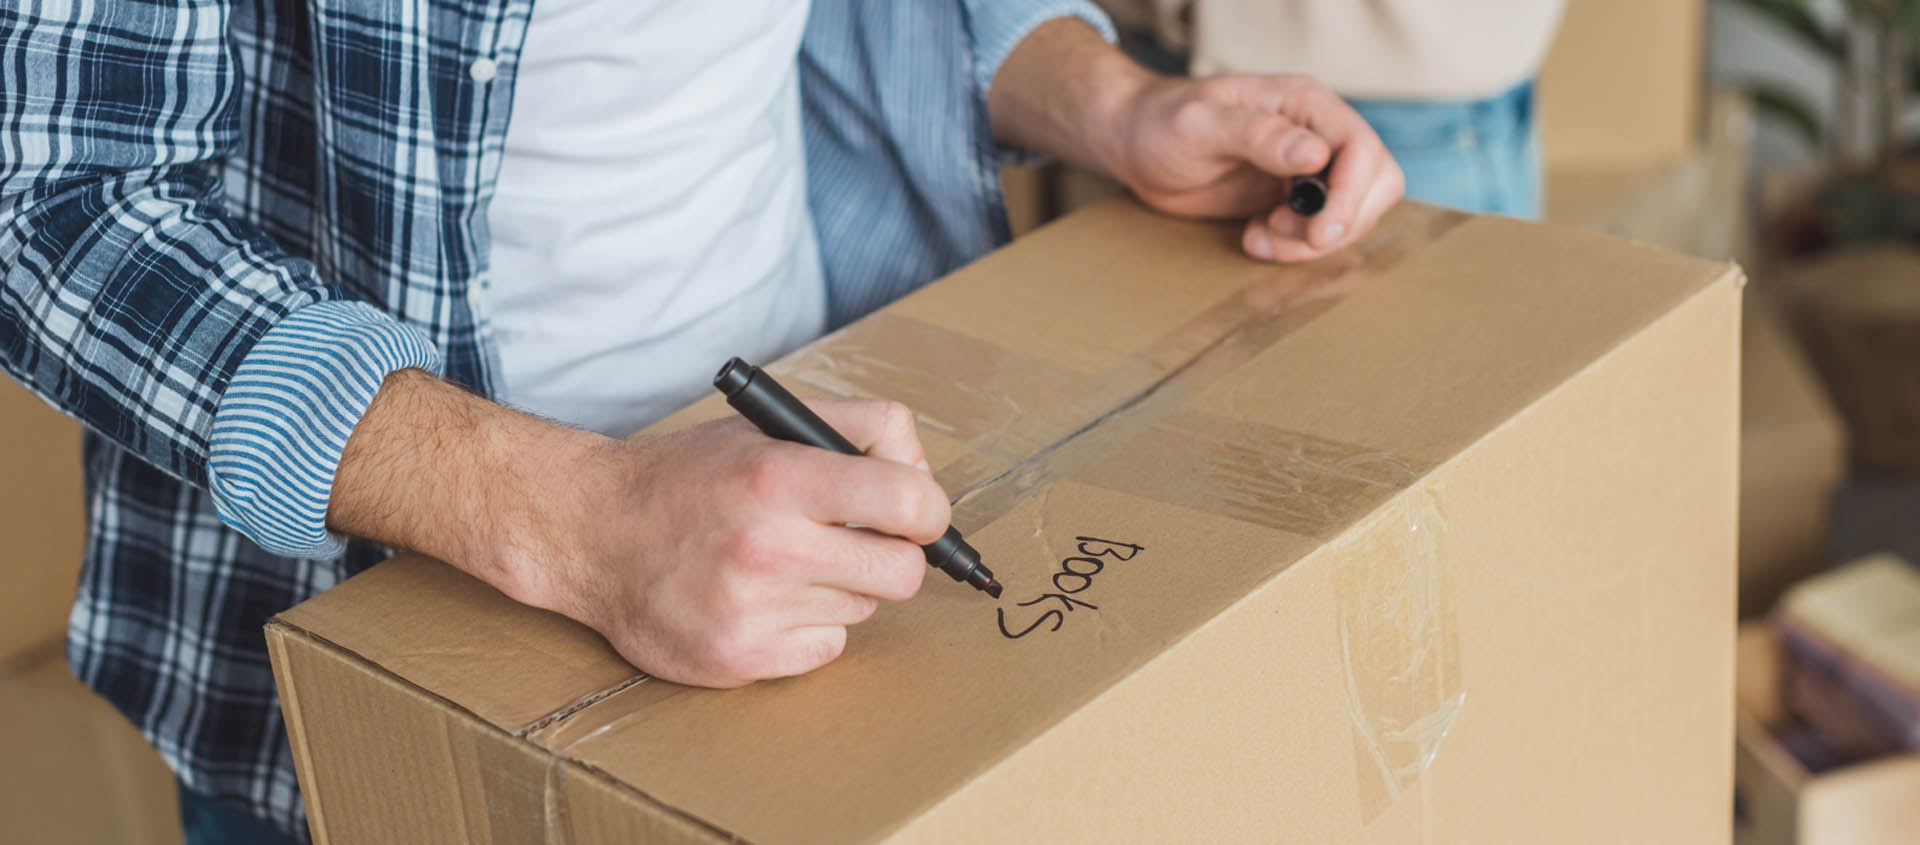 7 Tips to Stay Organized For Your Move Featured Image